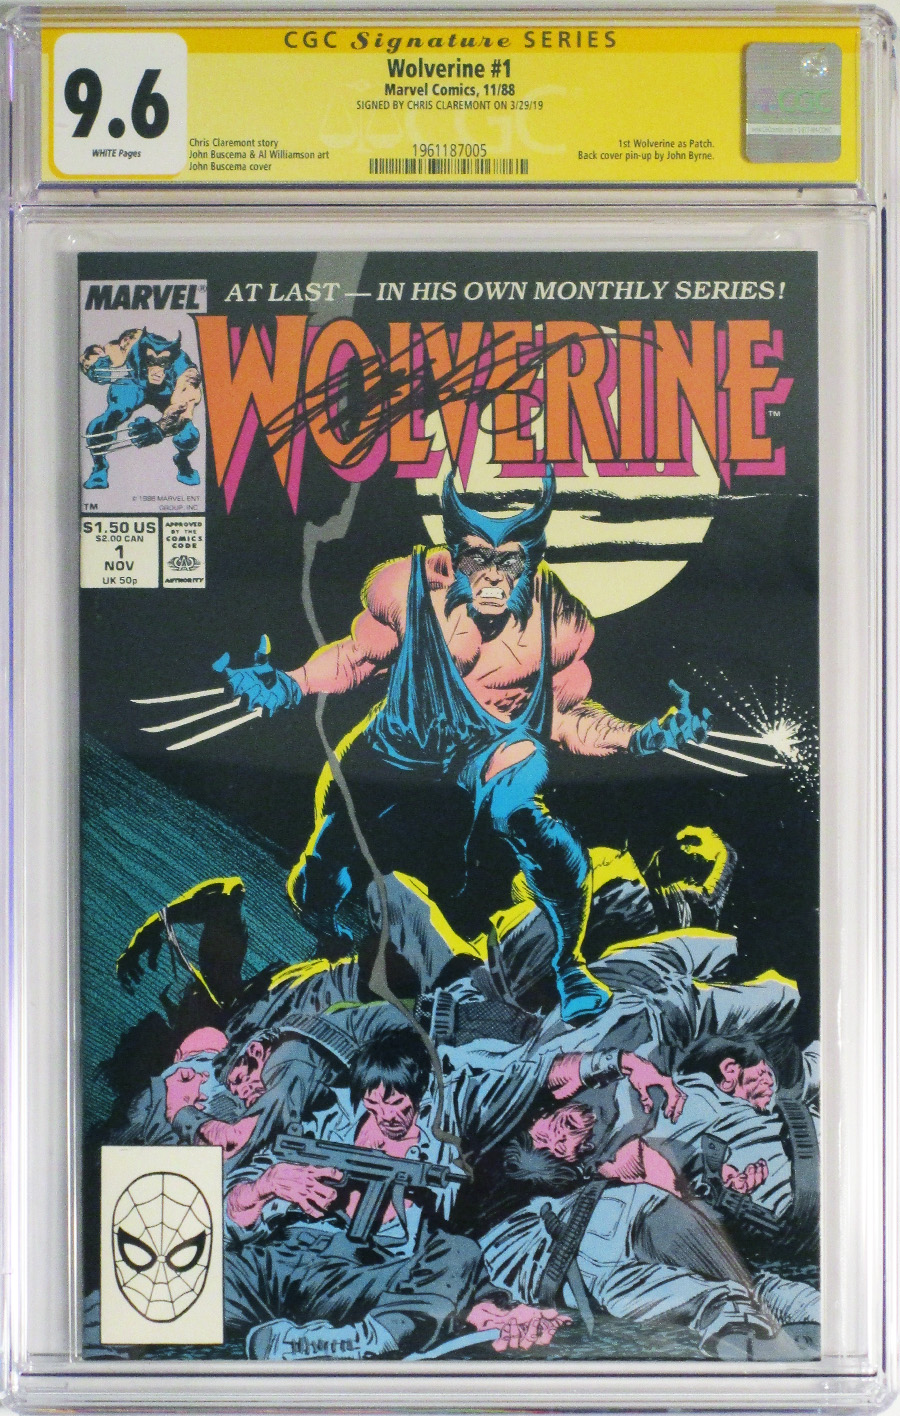 Wolverine Vol 2 #1 Cover B CGC Signature Series 9.6 Signed by Chris Claremont